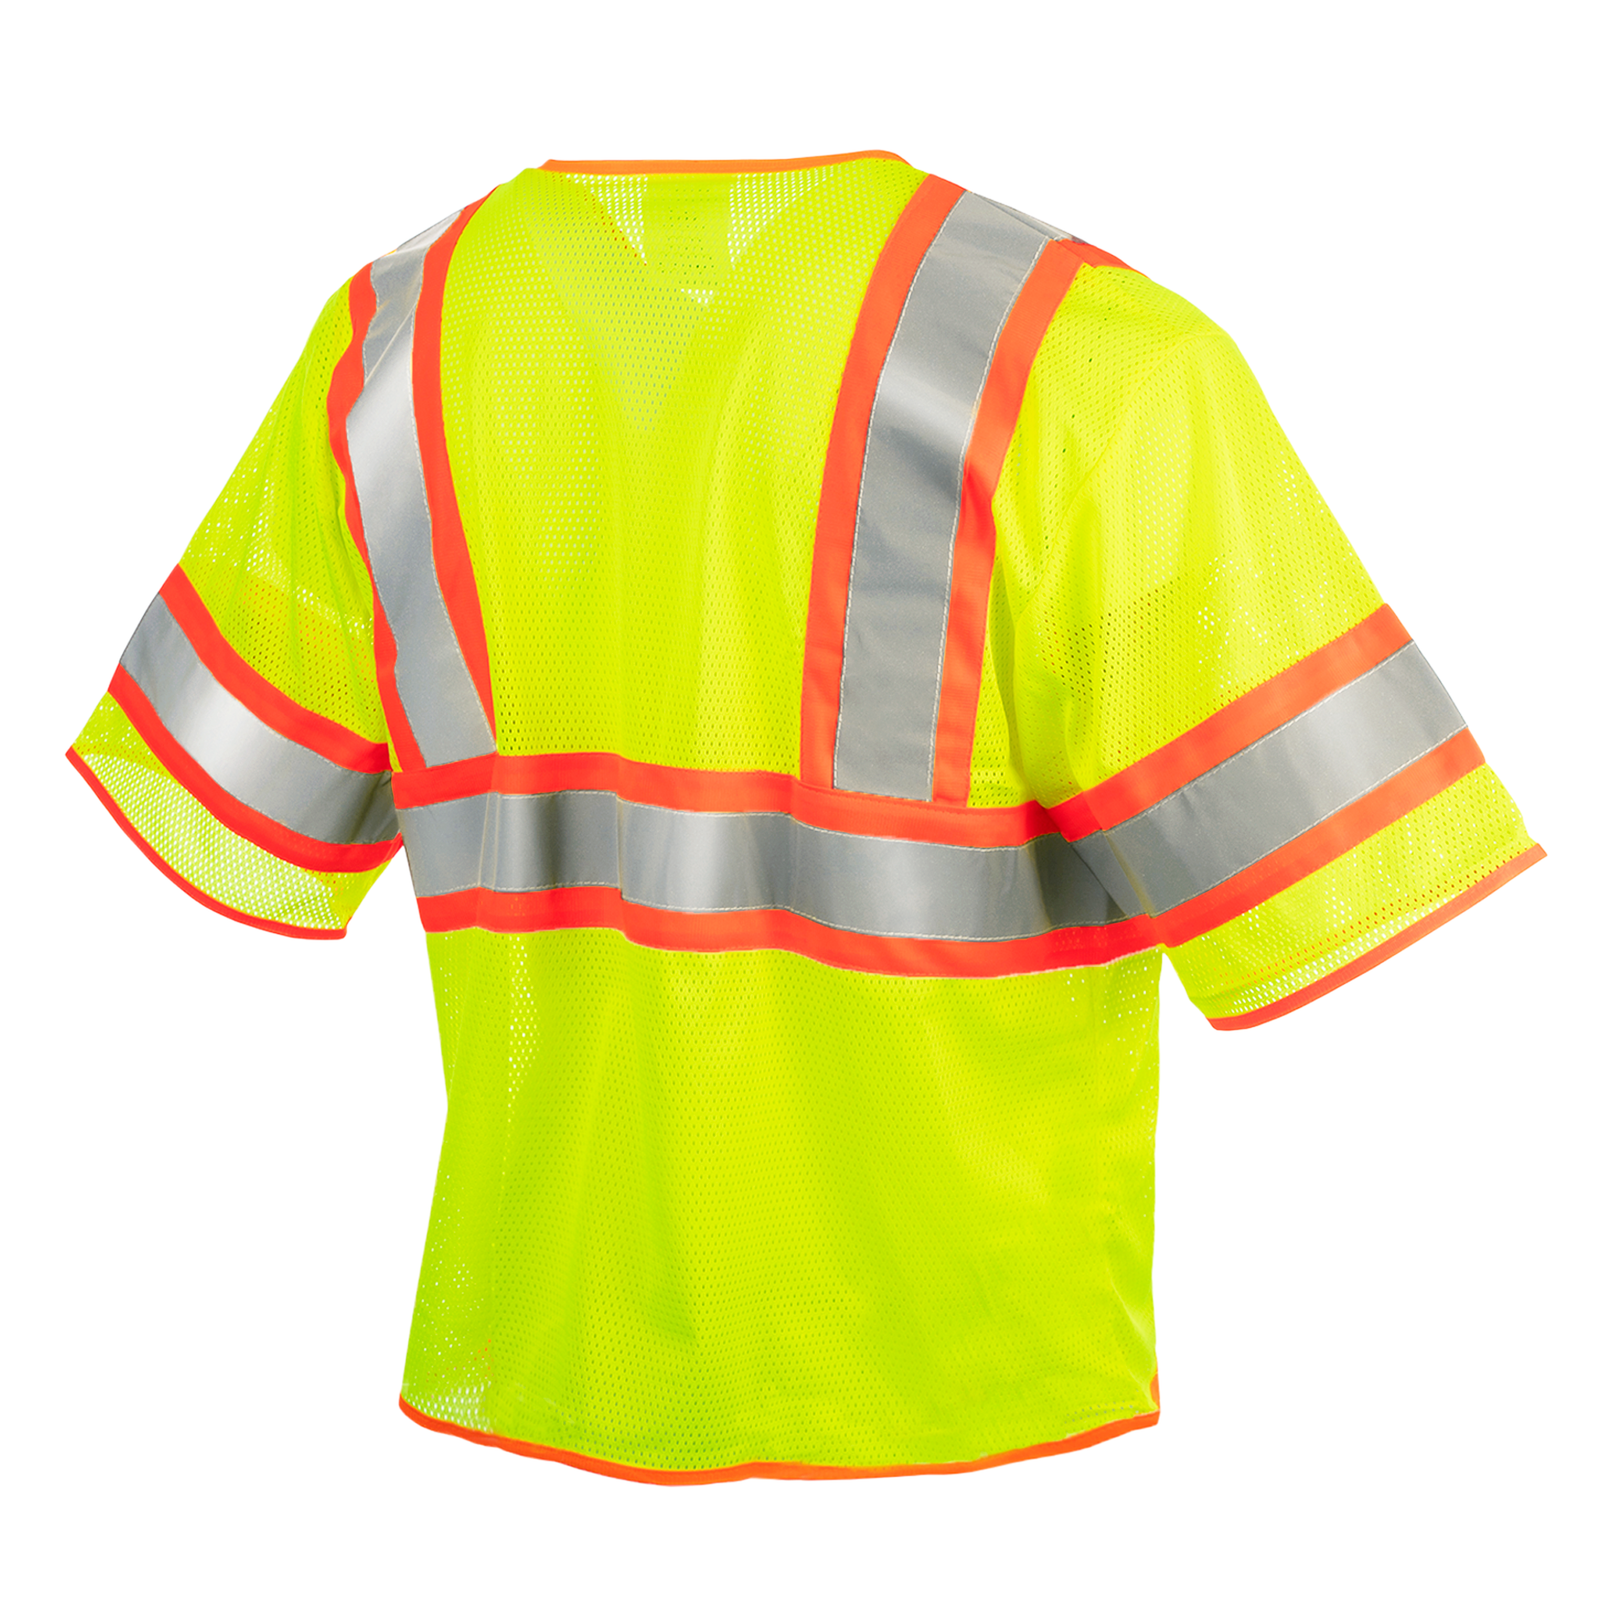 Back view of the JORESTECH® Hi-Visibility two toned mesh sleeved safety vest with reflective strips